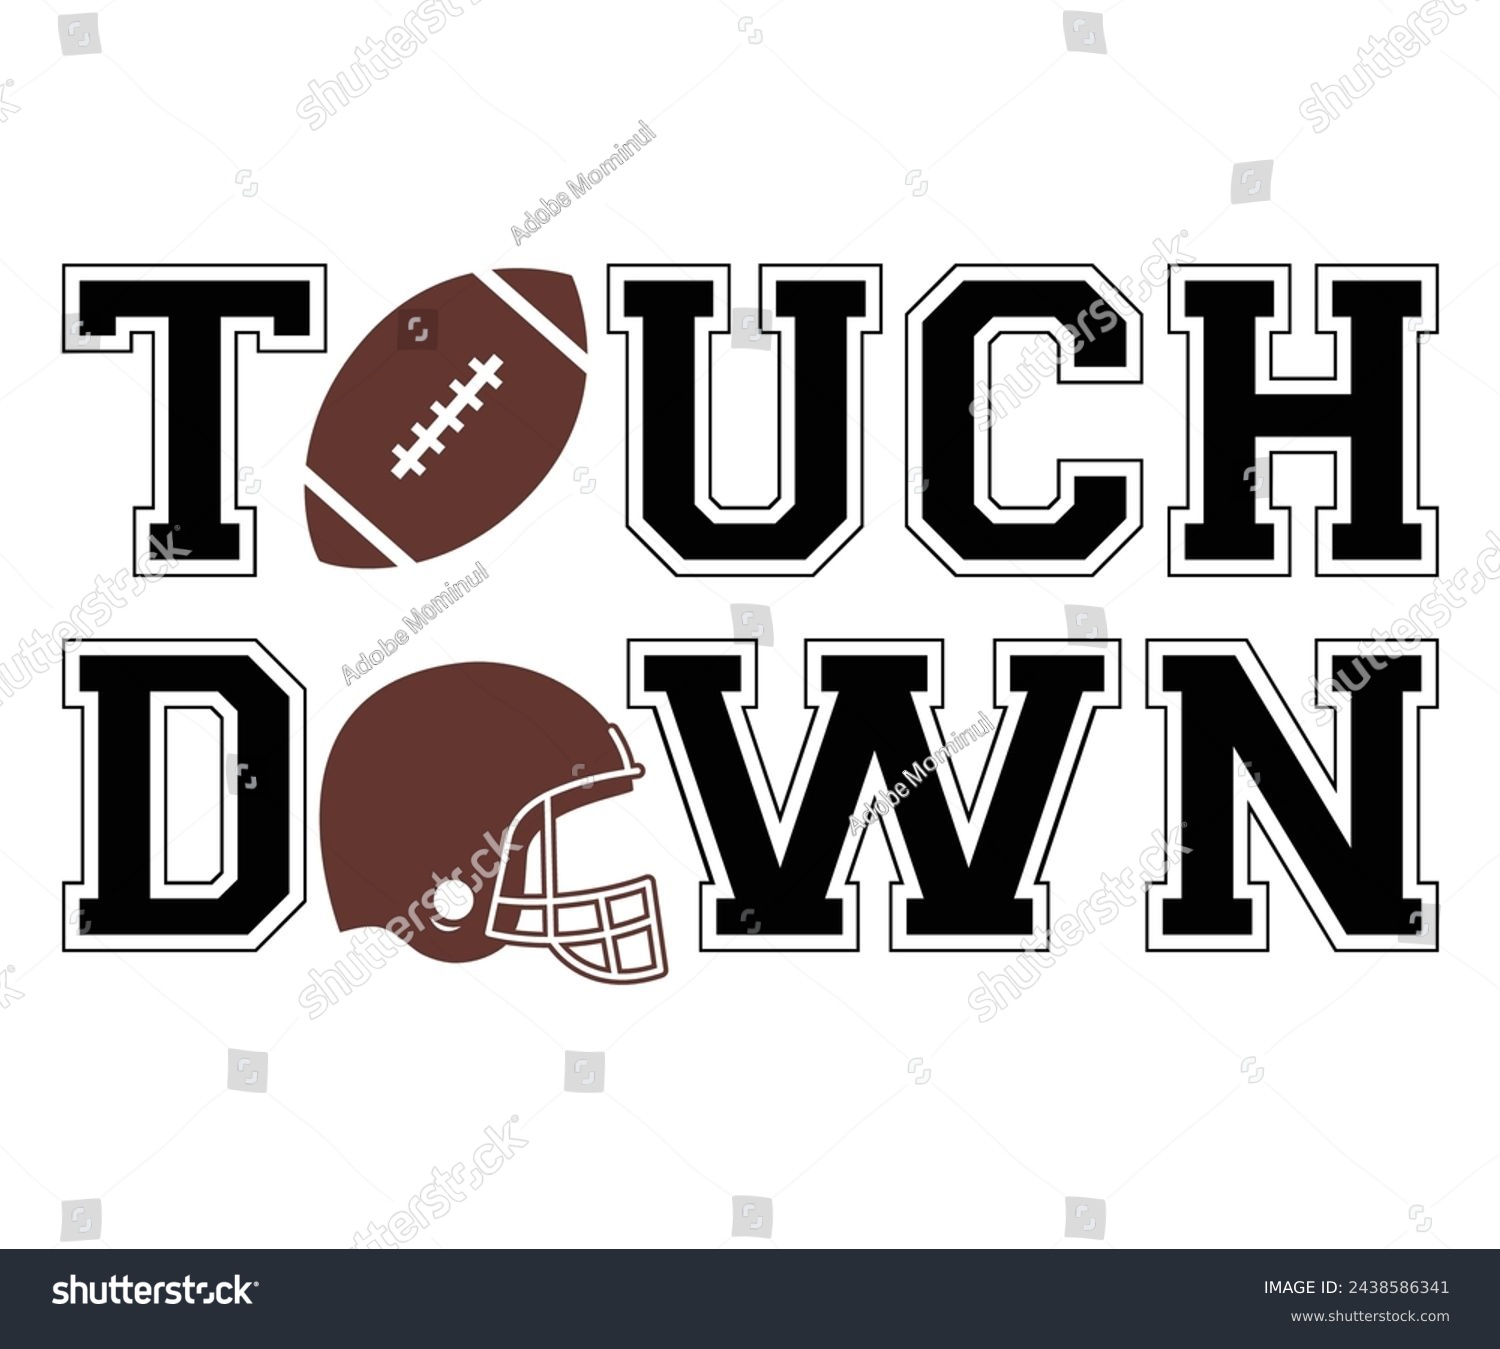 SVG of Touch Down,Football Svg,Football Player Svg,Game Day Shirt,Football Quotes Svg,American Football Svg,Soccer Svg,Cut File,Commercial use svg